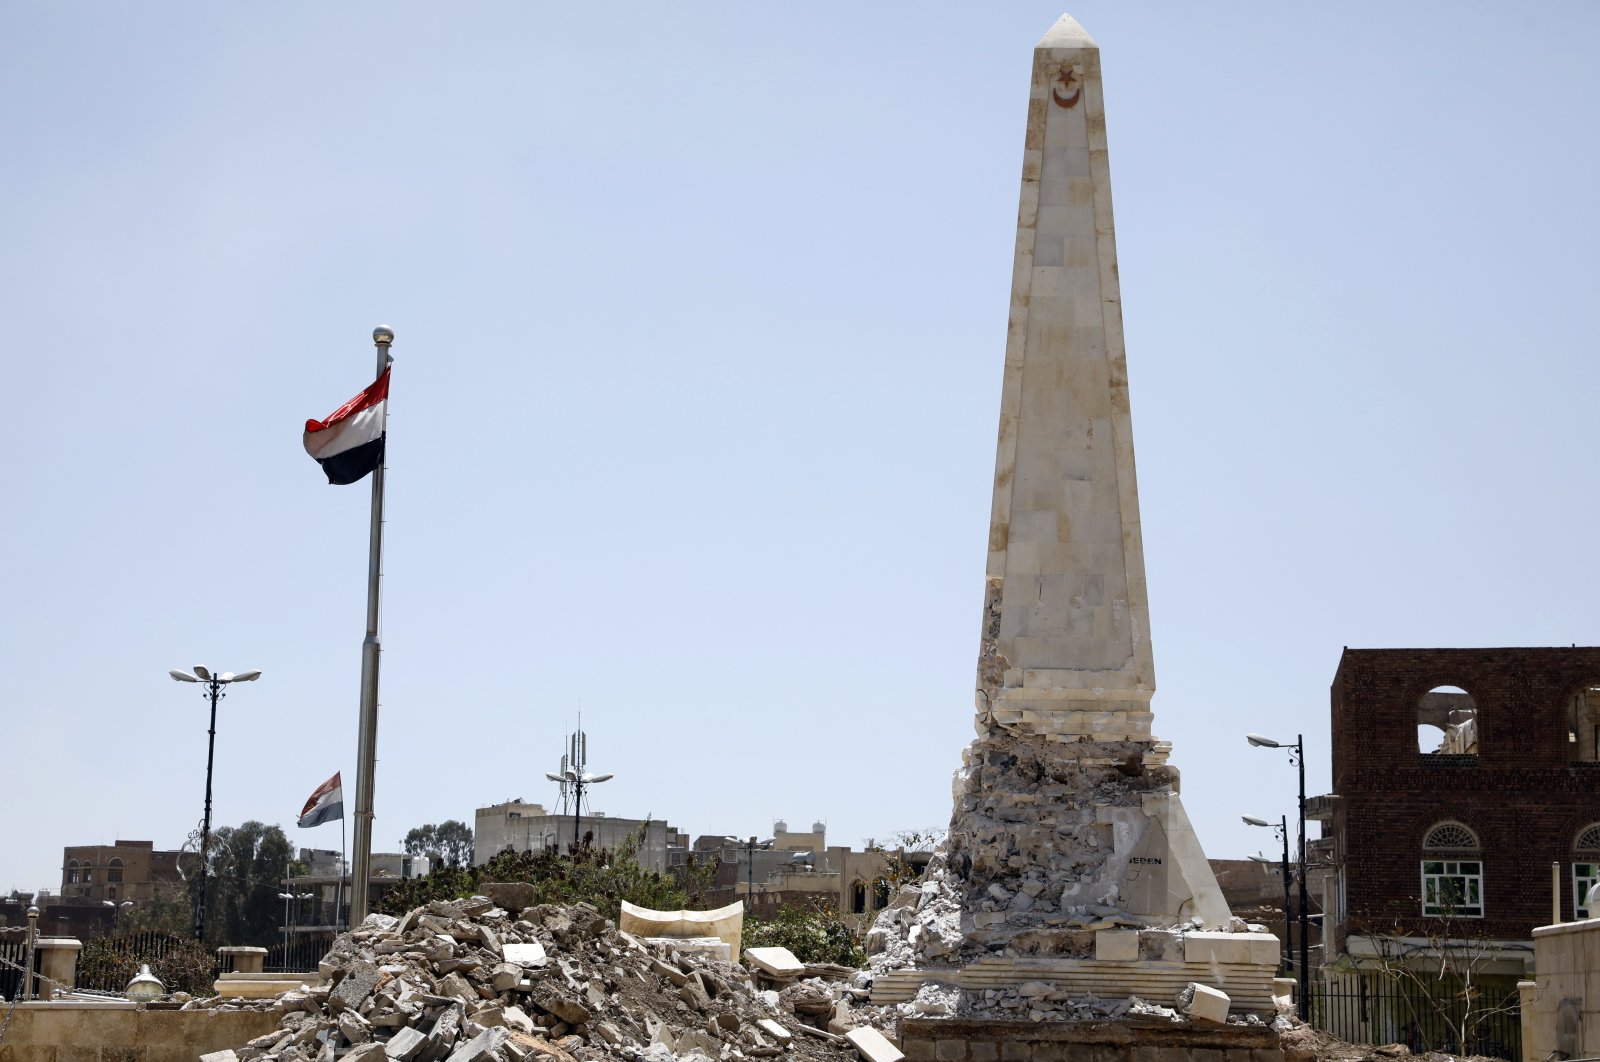 A general view shows a damaged Turkish memorial after Houthi supporters tried to demolish it, in Sanaa, Yemen, March 12, 2022. (EPA Photo)